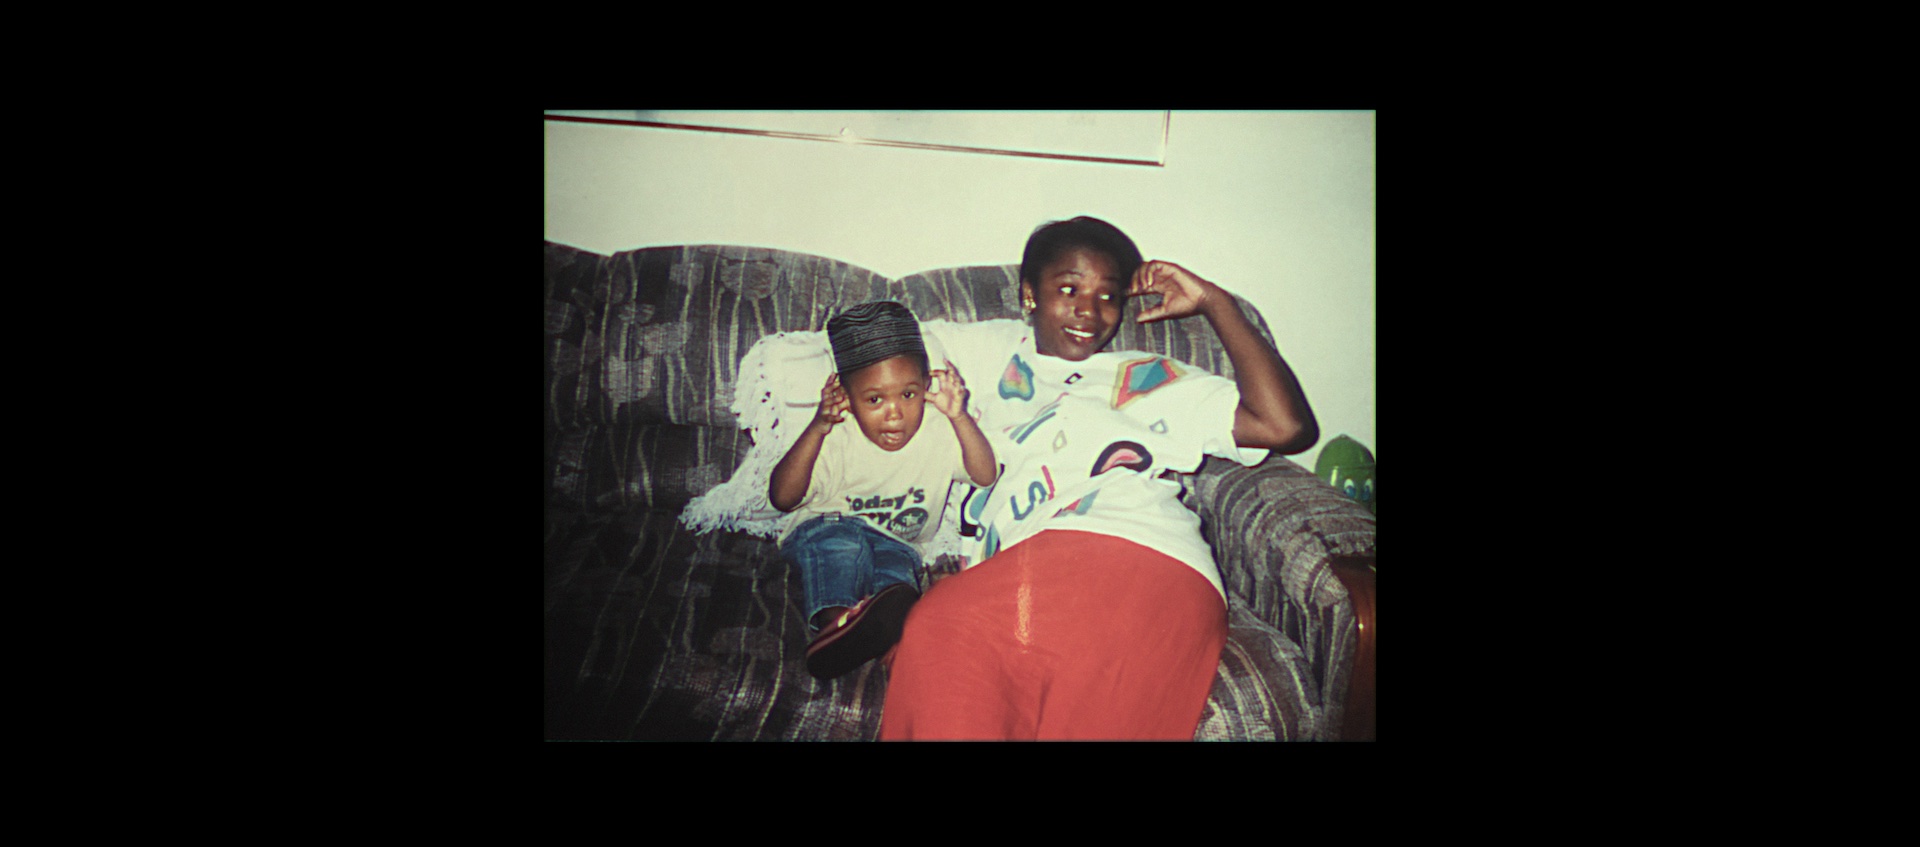 A vintage color photo of a young, smiling Black woman and her small son sitting on a couch. The image is surrounded by a thick black border.